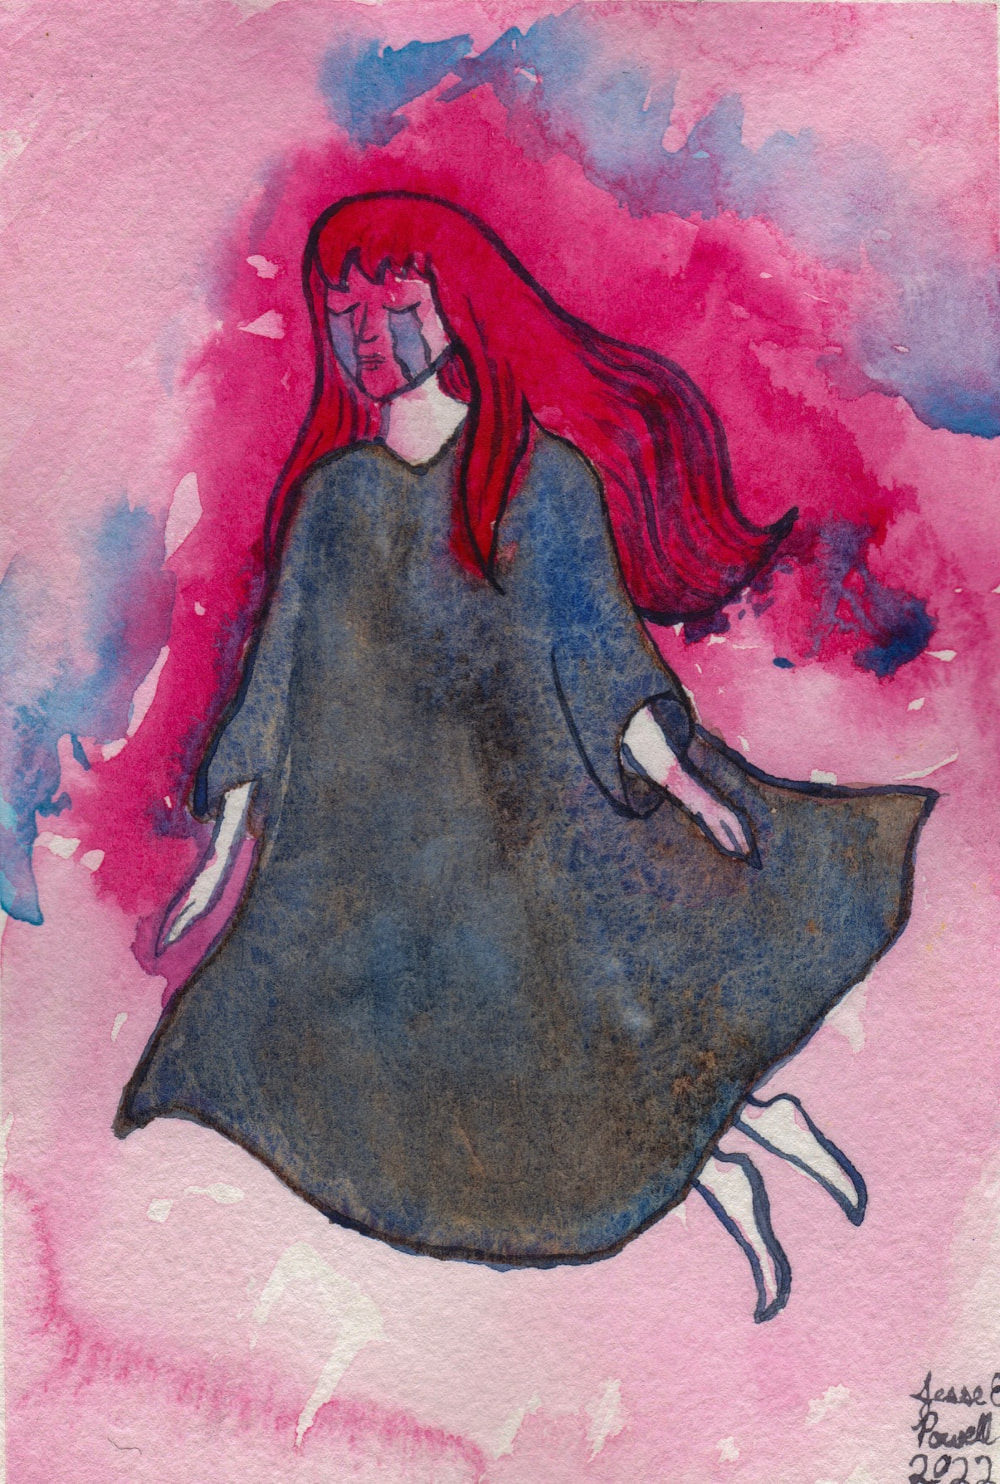 Watercolor painting of a person with long pink hair wearing a blue-gray dress. They’re facing the left side of the painting. Their eyes are closed and they’re crying. The background is mottled pink and blue. 